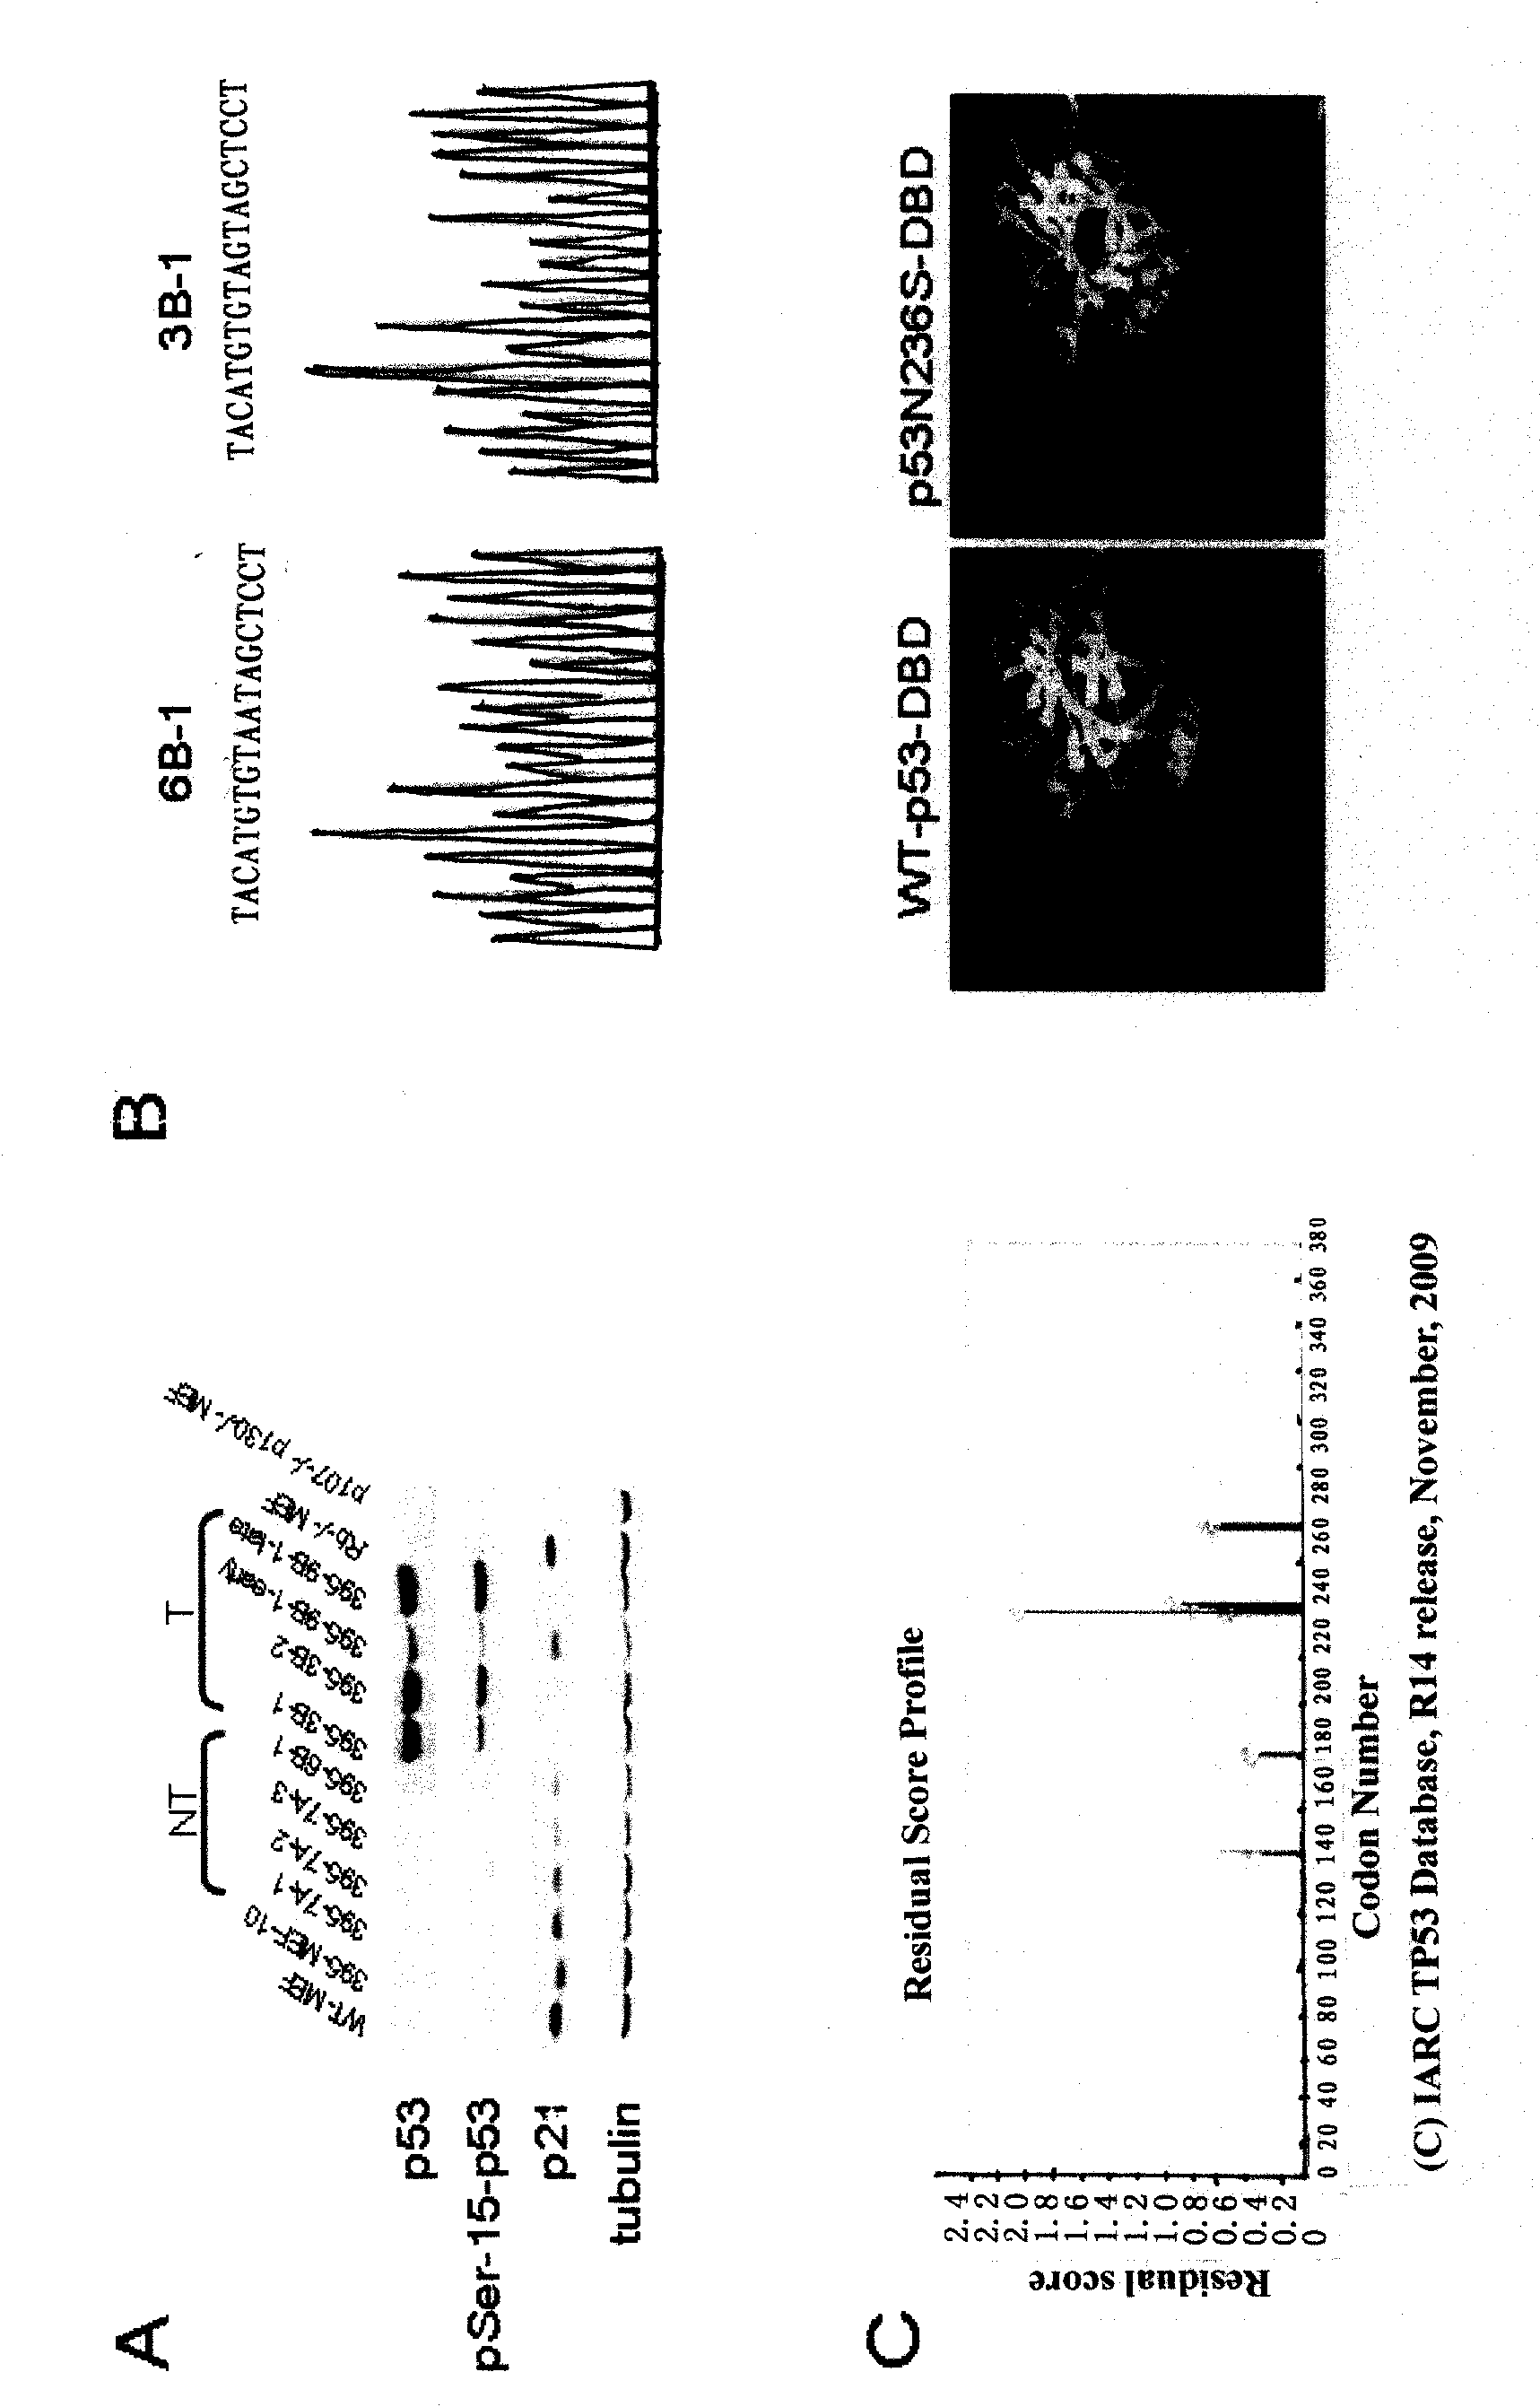 Peculiar p53 mutated protein-p53N236S of ALT tumor caused by progeria syndrome and application thereof